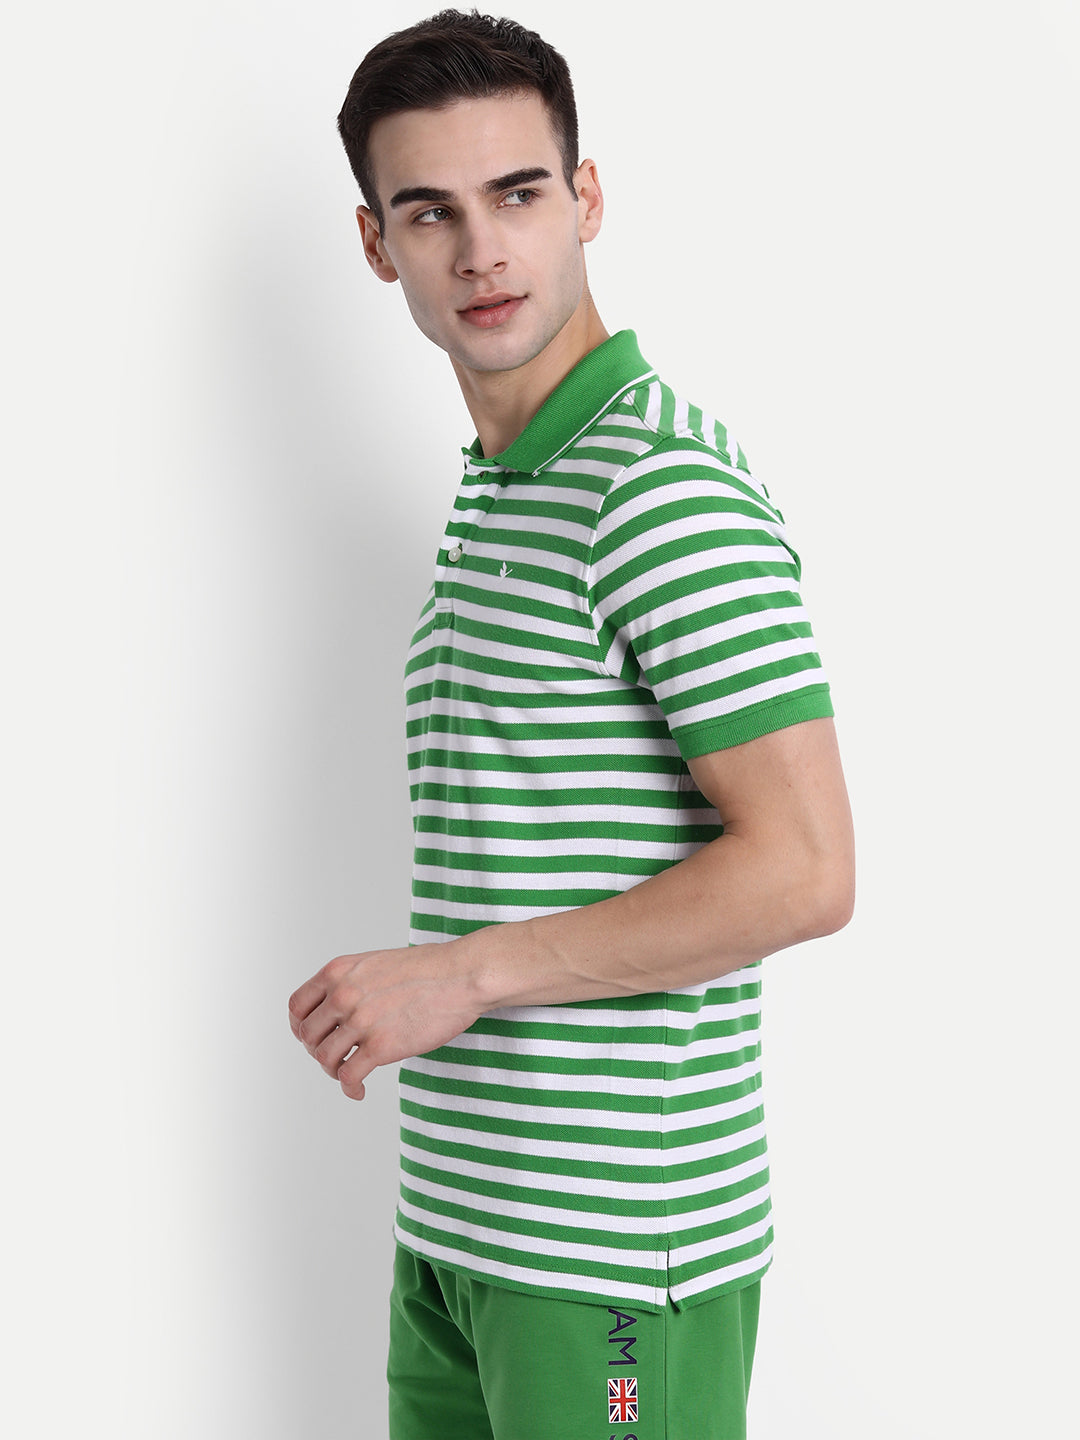 MEN'S COLLAR T-SHIRT WITH HALF SLEEVES IN COTTON-RICH FABRIC